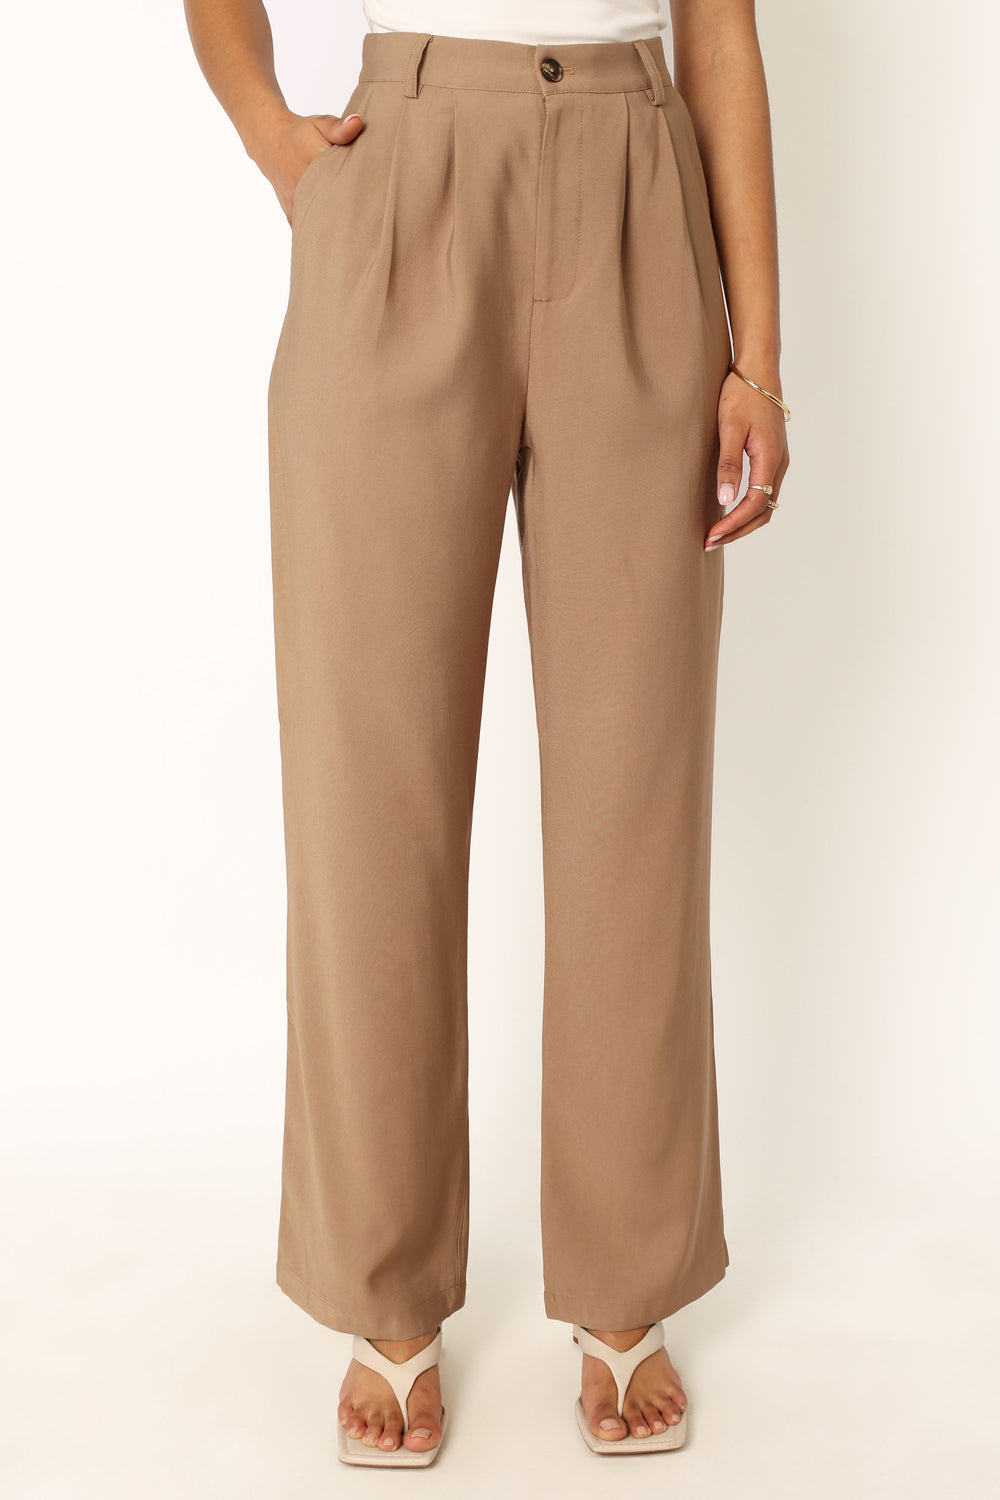 Petal and Pup USA BOTTOMS Noelle Pant - Light Brown